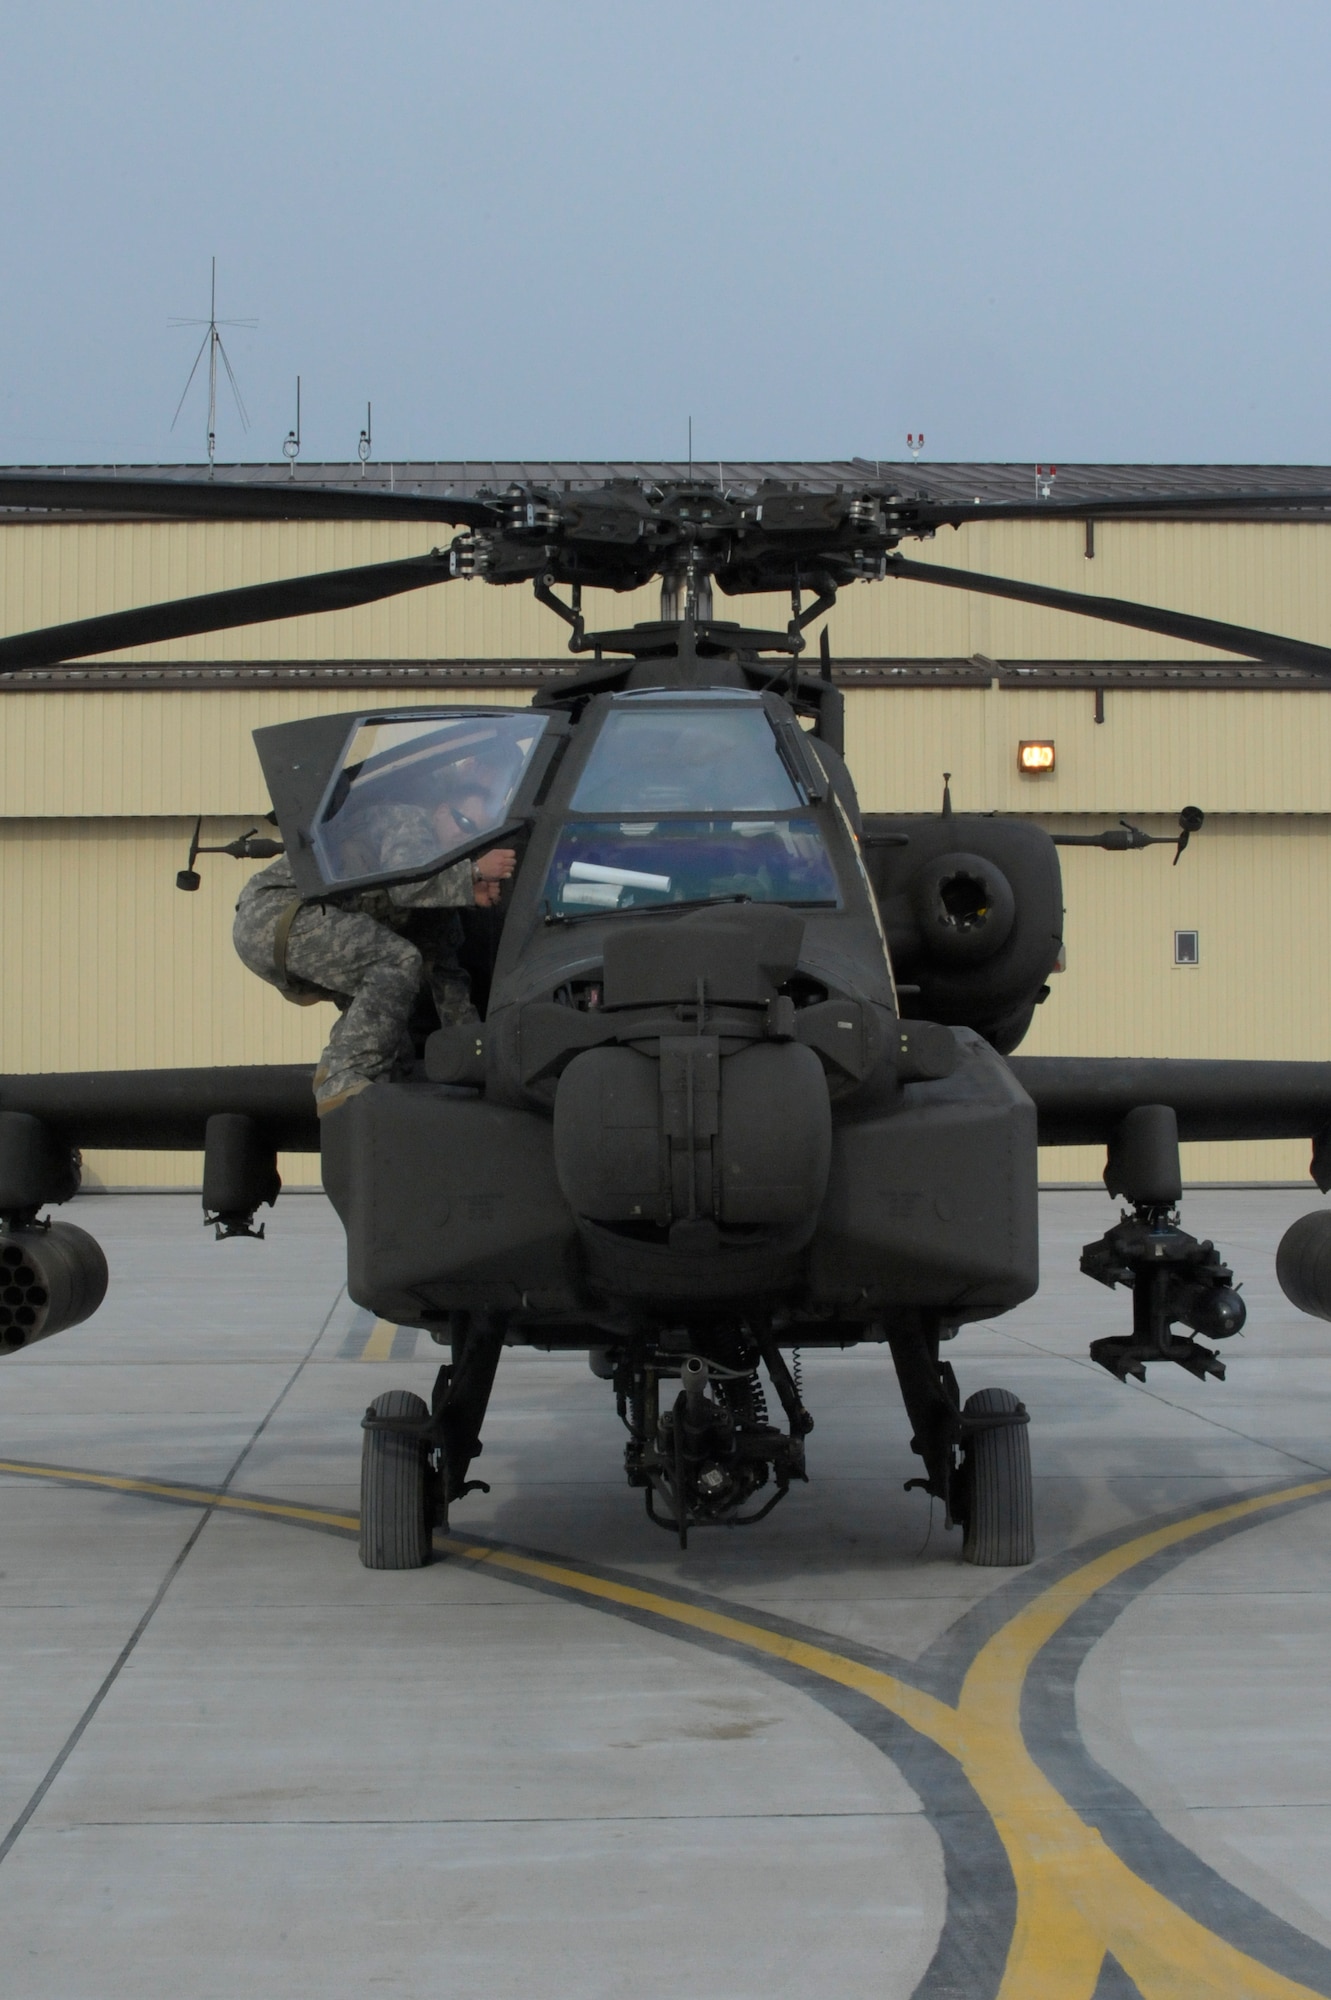 A U.S. Army AH-64 Apache Longbow crew chief from the 1-135th Attack Reconnaissance Battalion at Whiteman Air Force Base, Mo., prepares his aircraft March 27, 2013, for its deployment to Afghanistan. The 1-135th ARB has been working closely with Airmen on Whiteman AFB to prepare for the deployment. (U.S. Air Force photo by Airman 1st Class Shelby R. Orozco/Released)